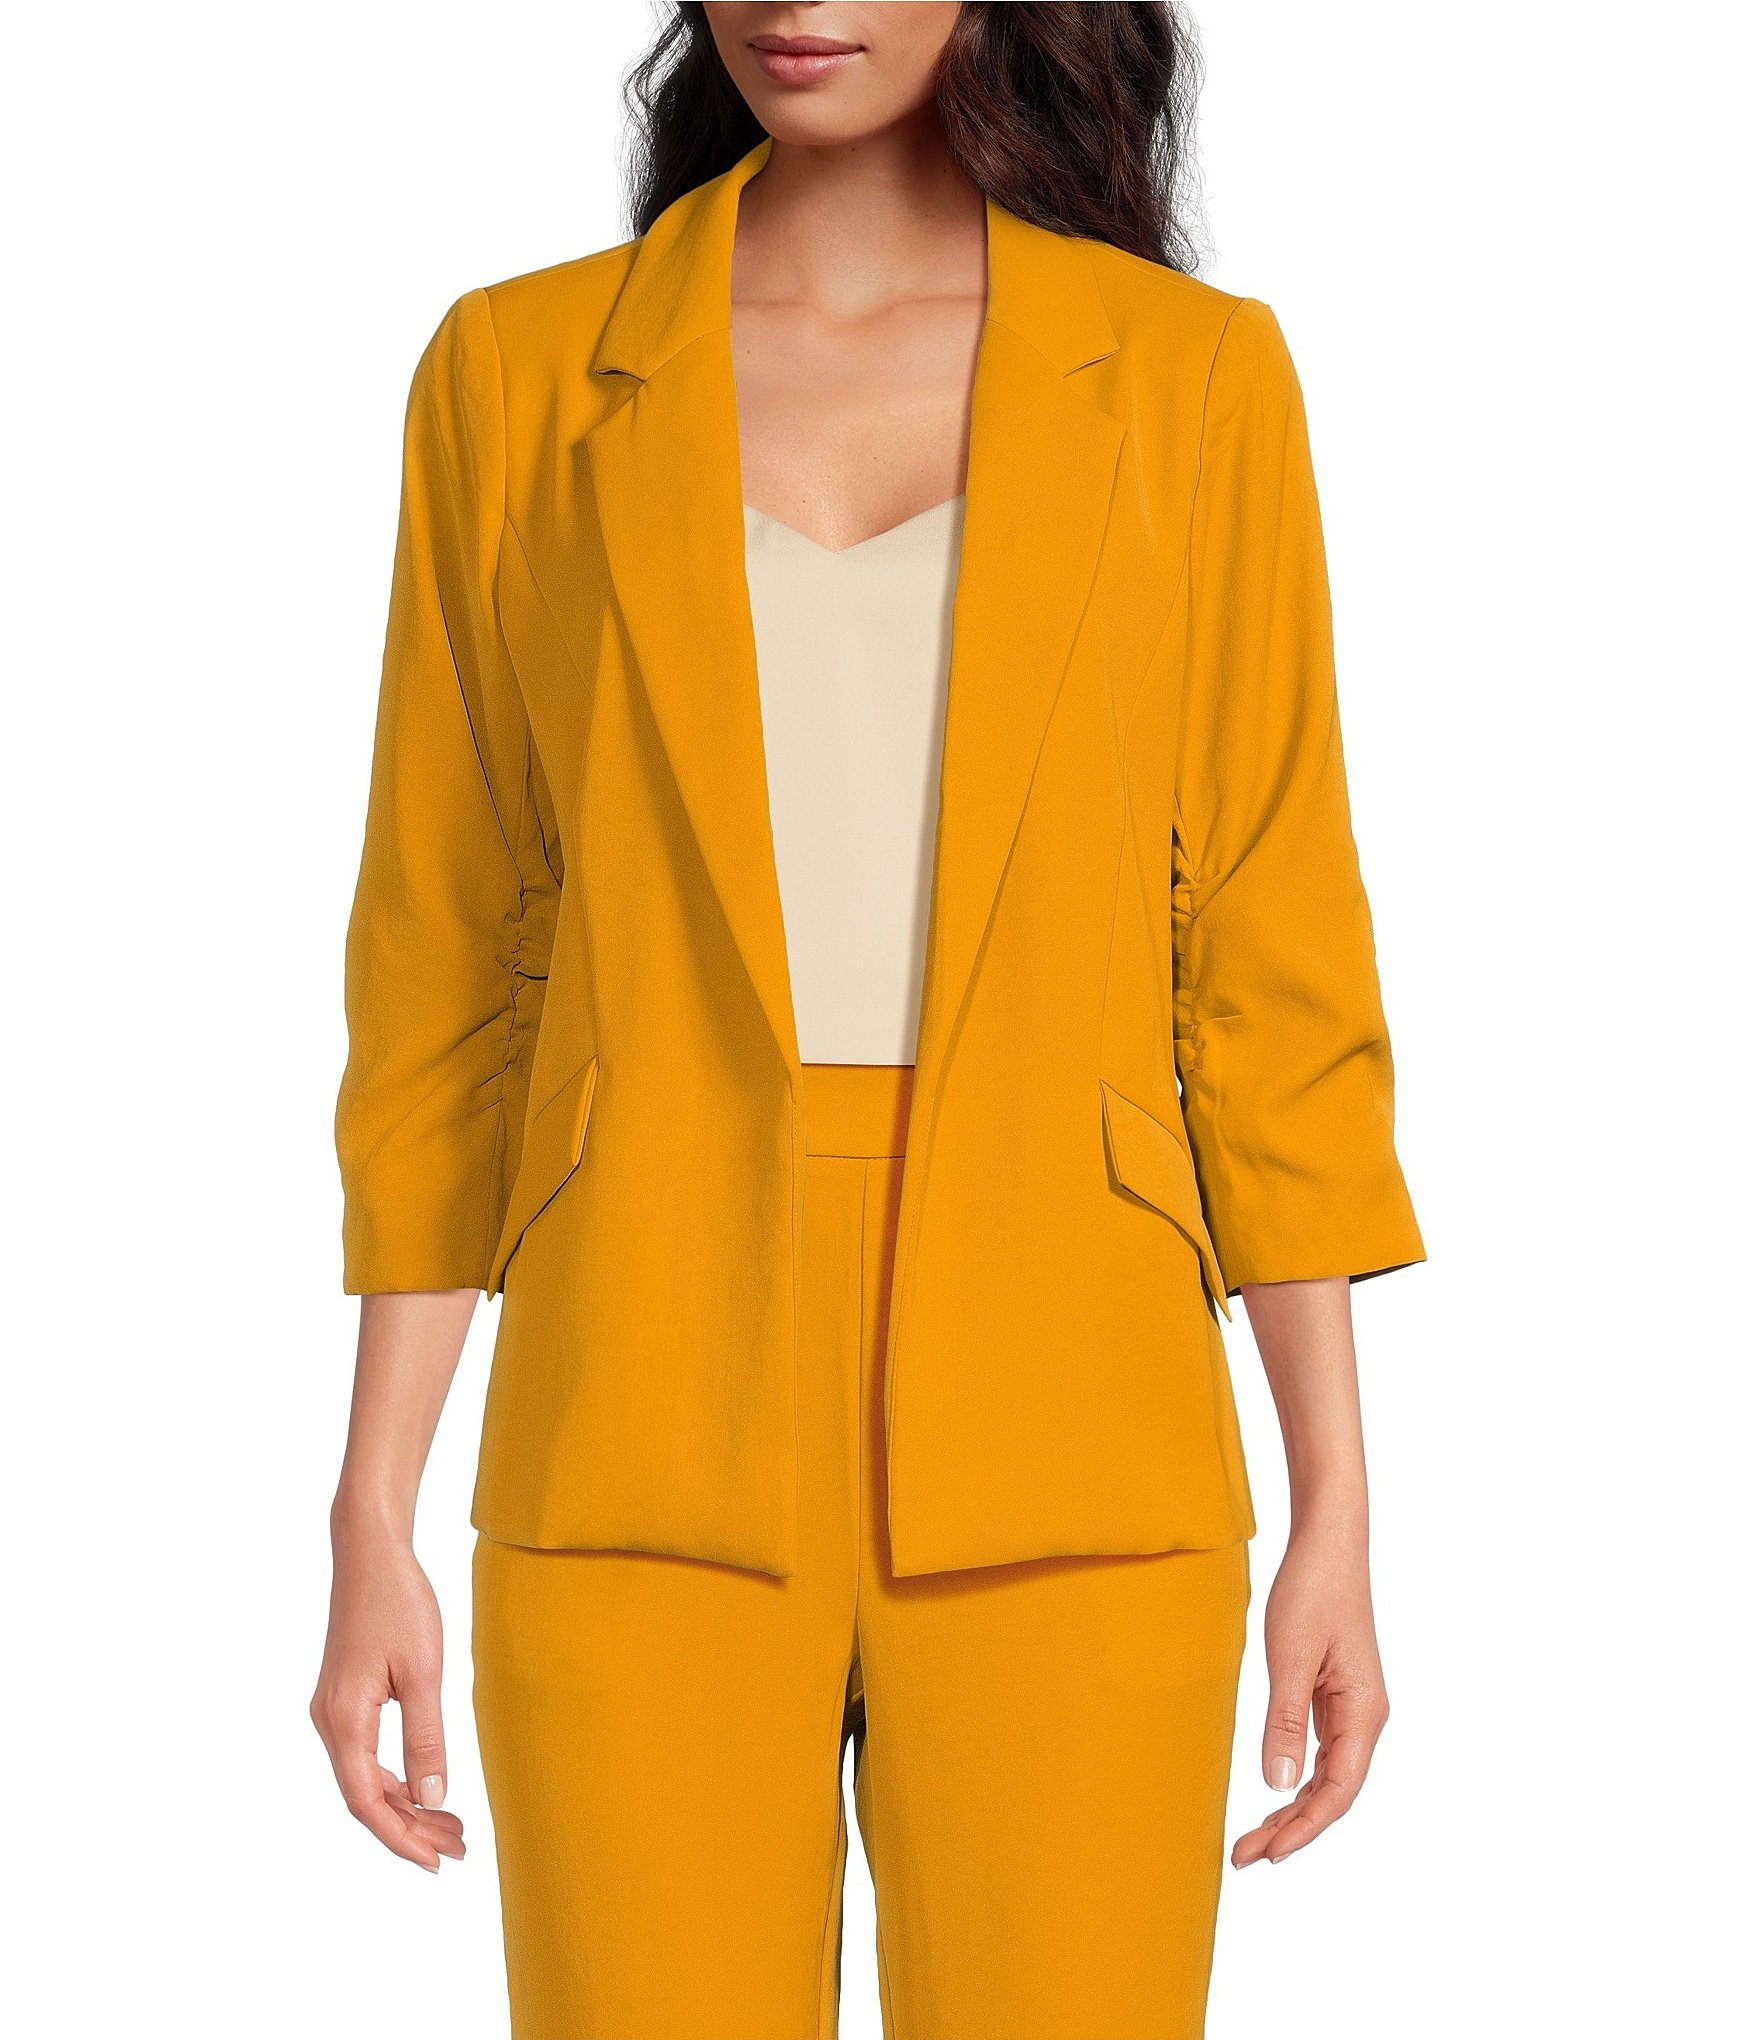 Plus Size Women Suits Yellow Ladies Office Work Wear Wedding 2 Pieces  Outfits | eBay